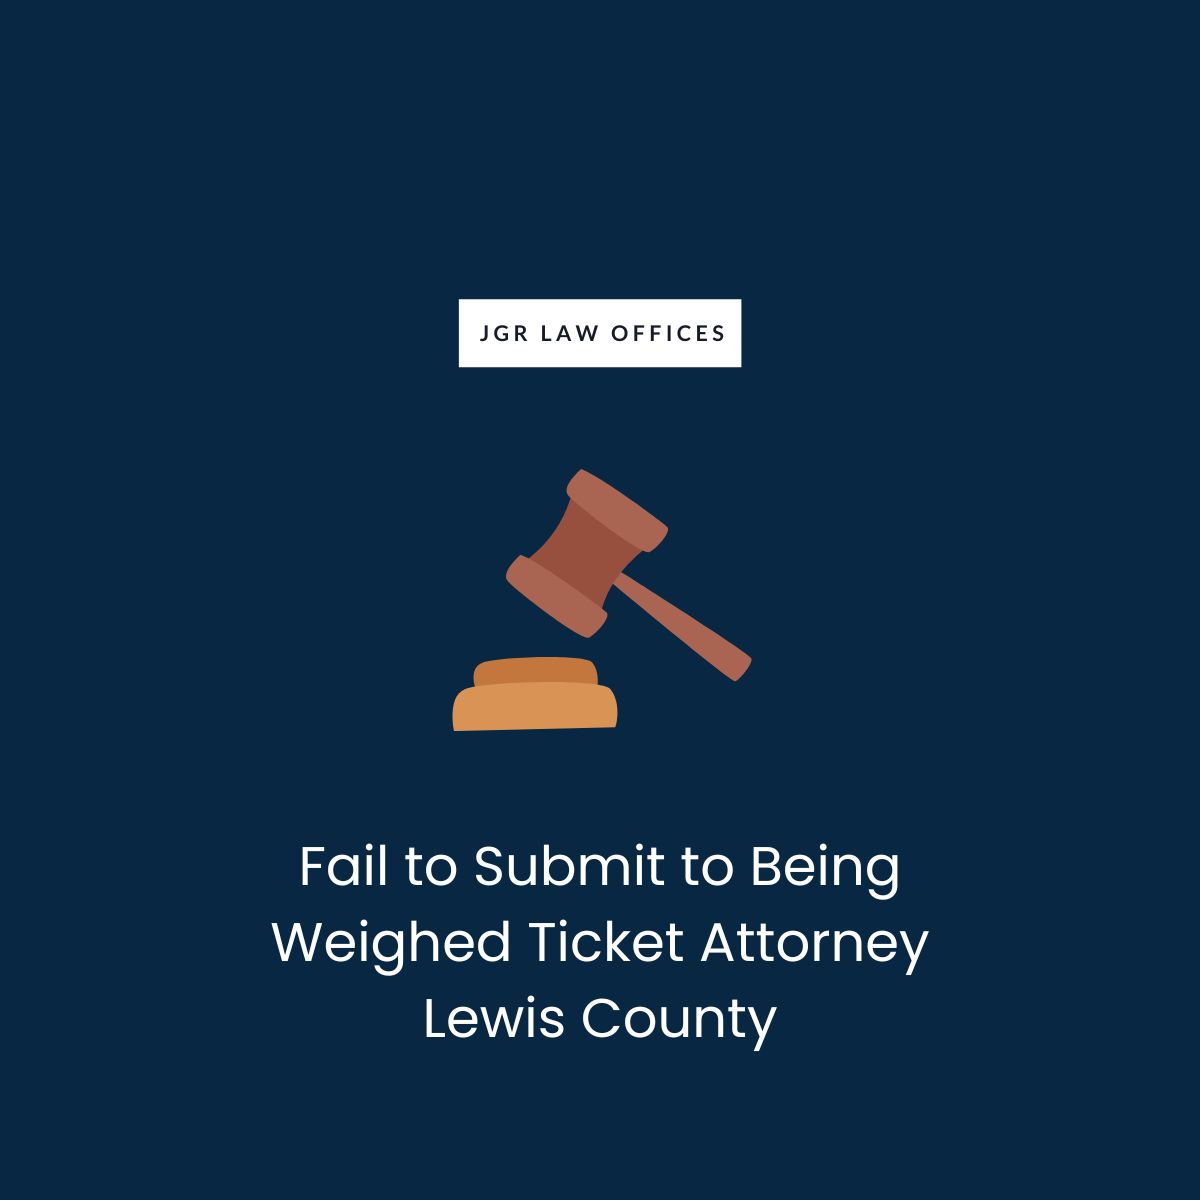 Fail to Submit to Being Weighed Ticket Attorney Lewis County